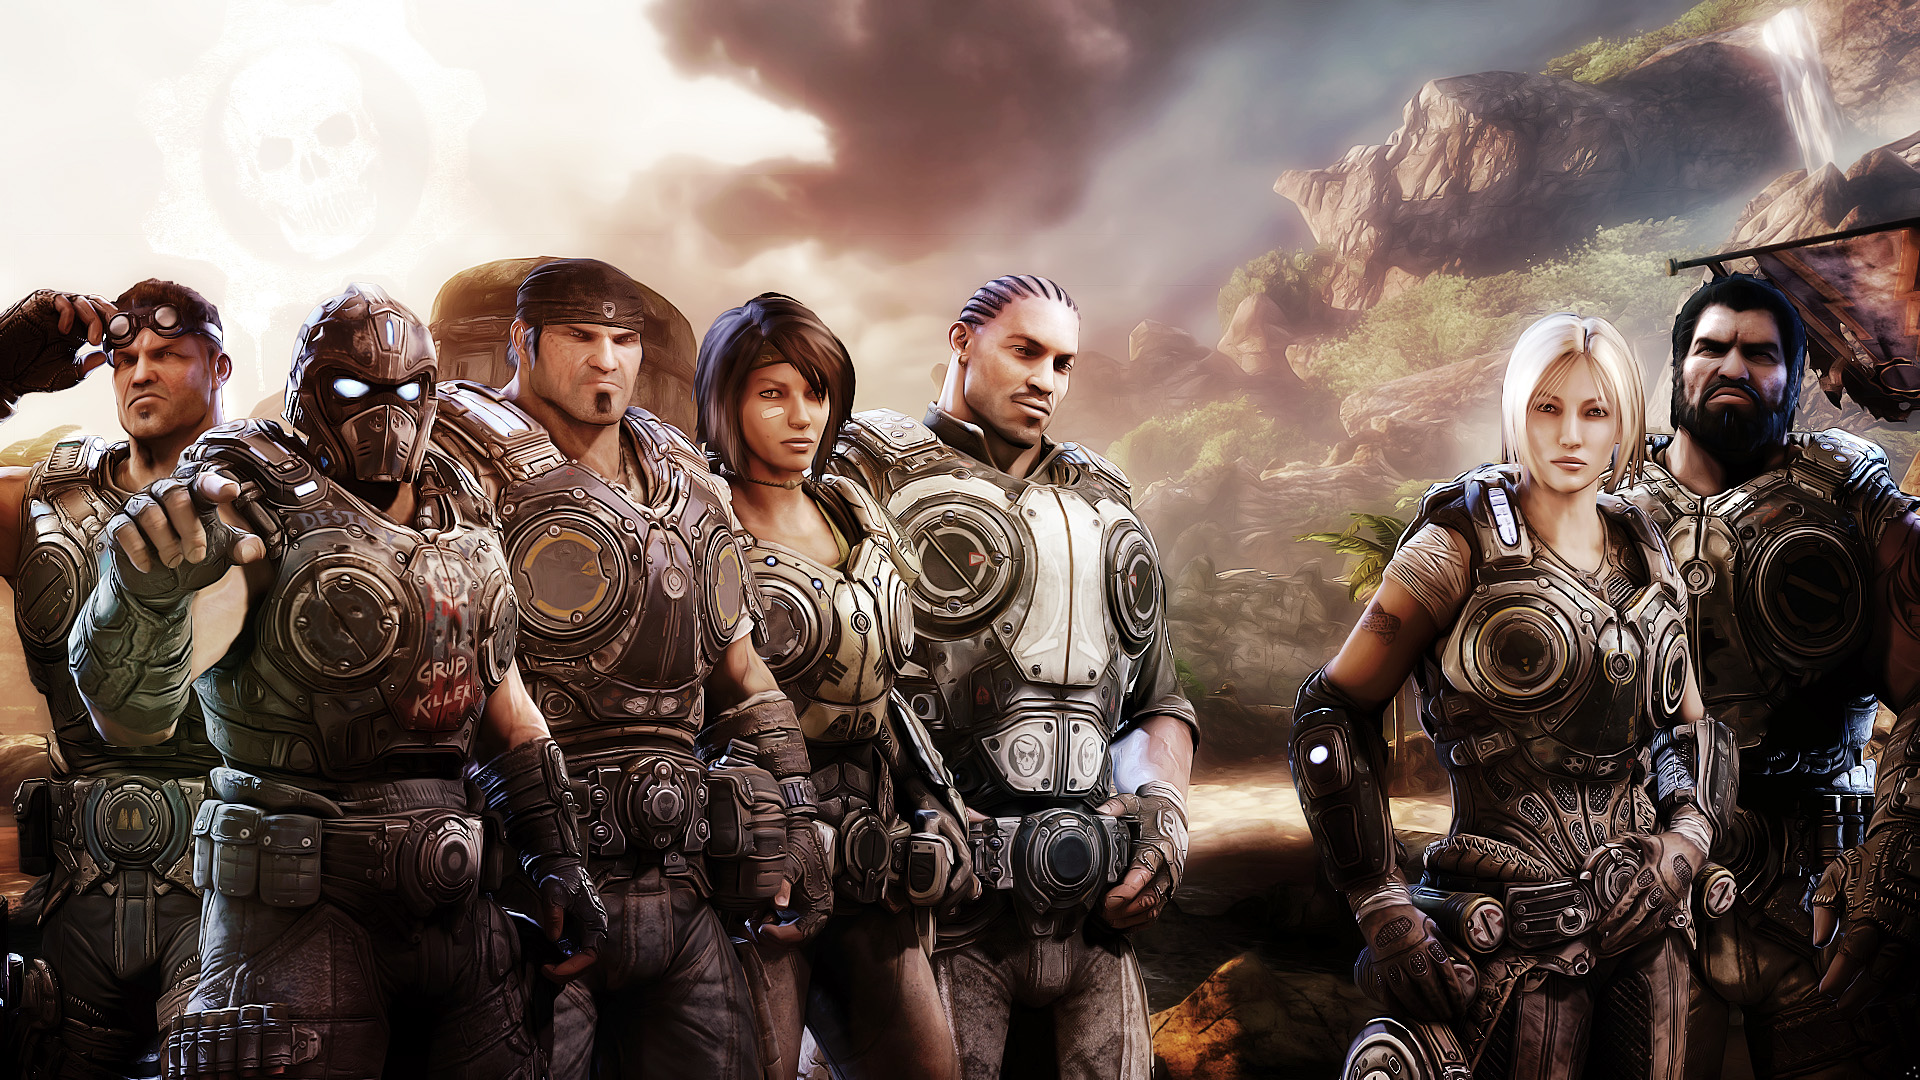 Gears of War 3 Xbox Game Wallpapers HD Wallpapers 1920x1080